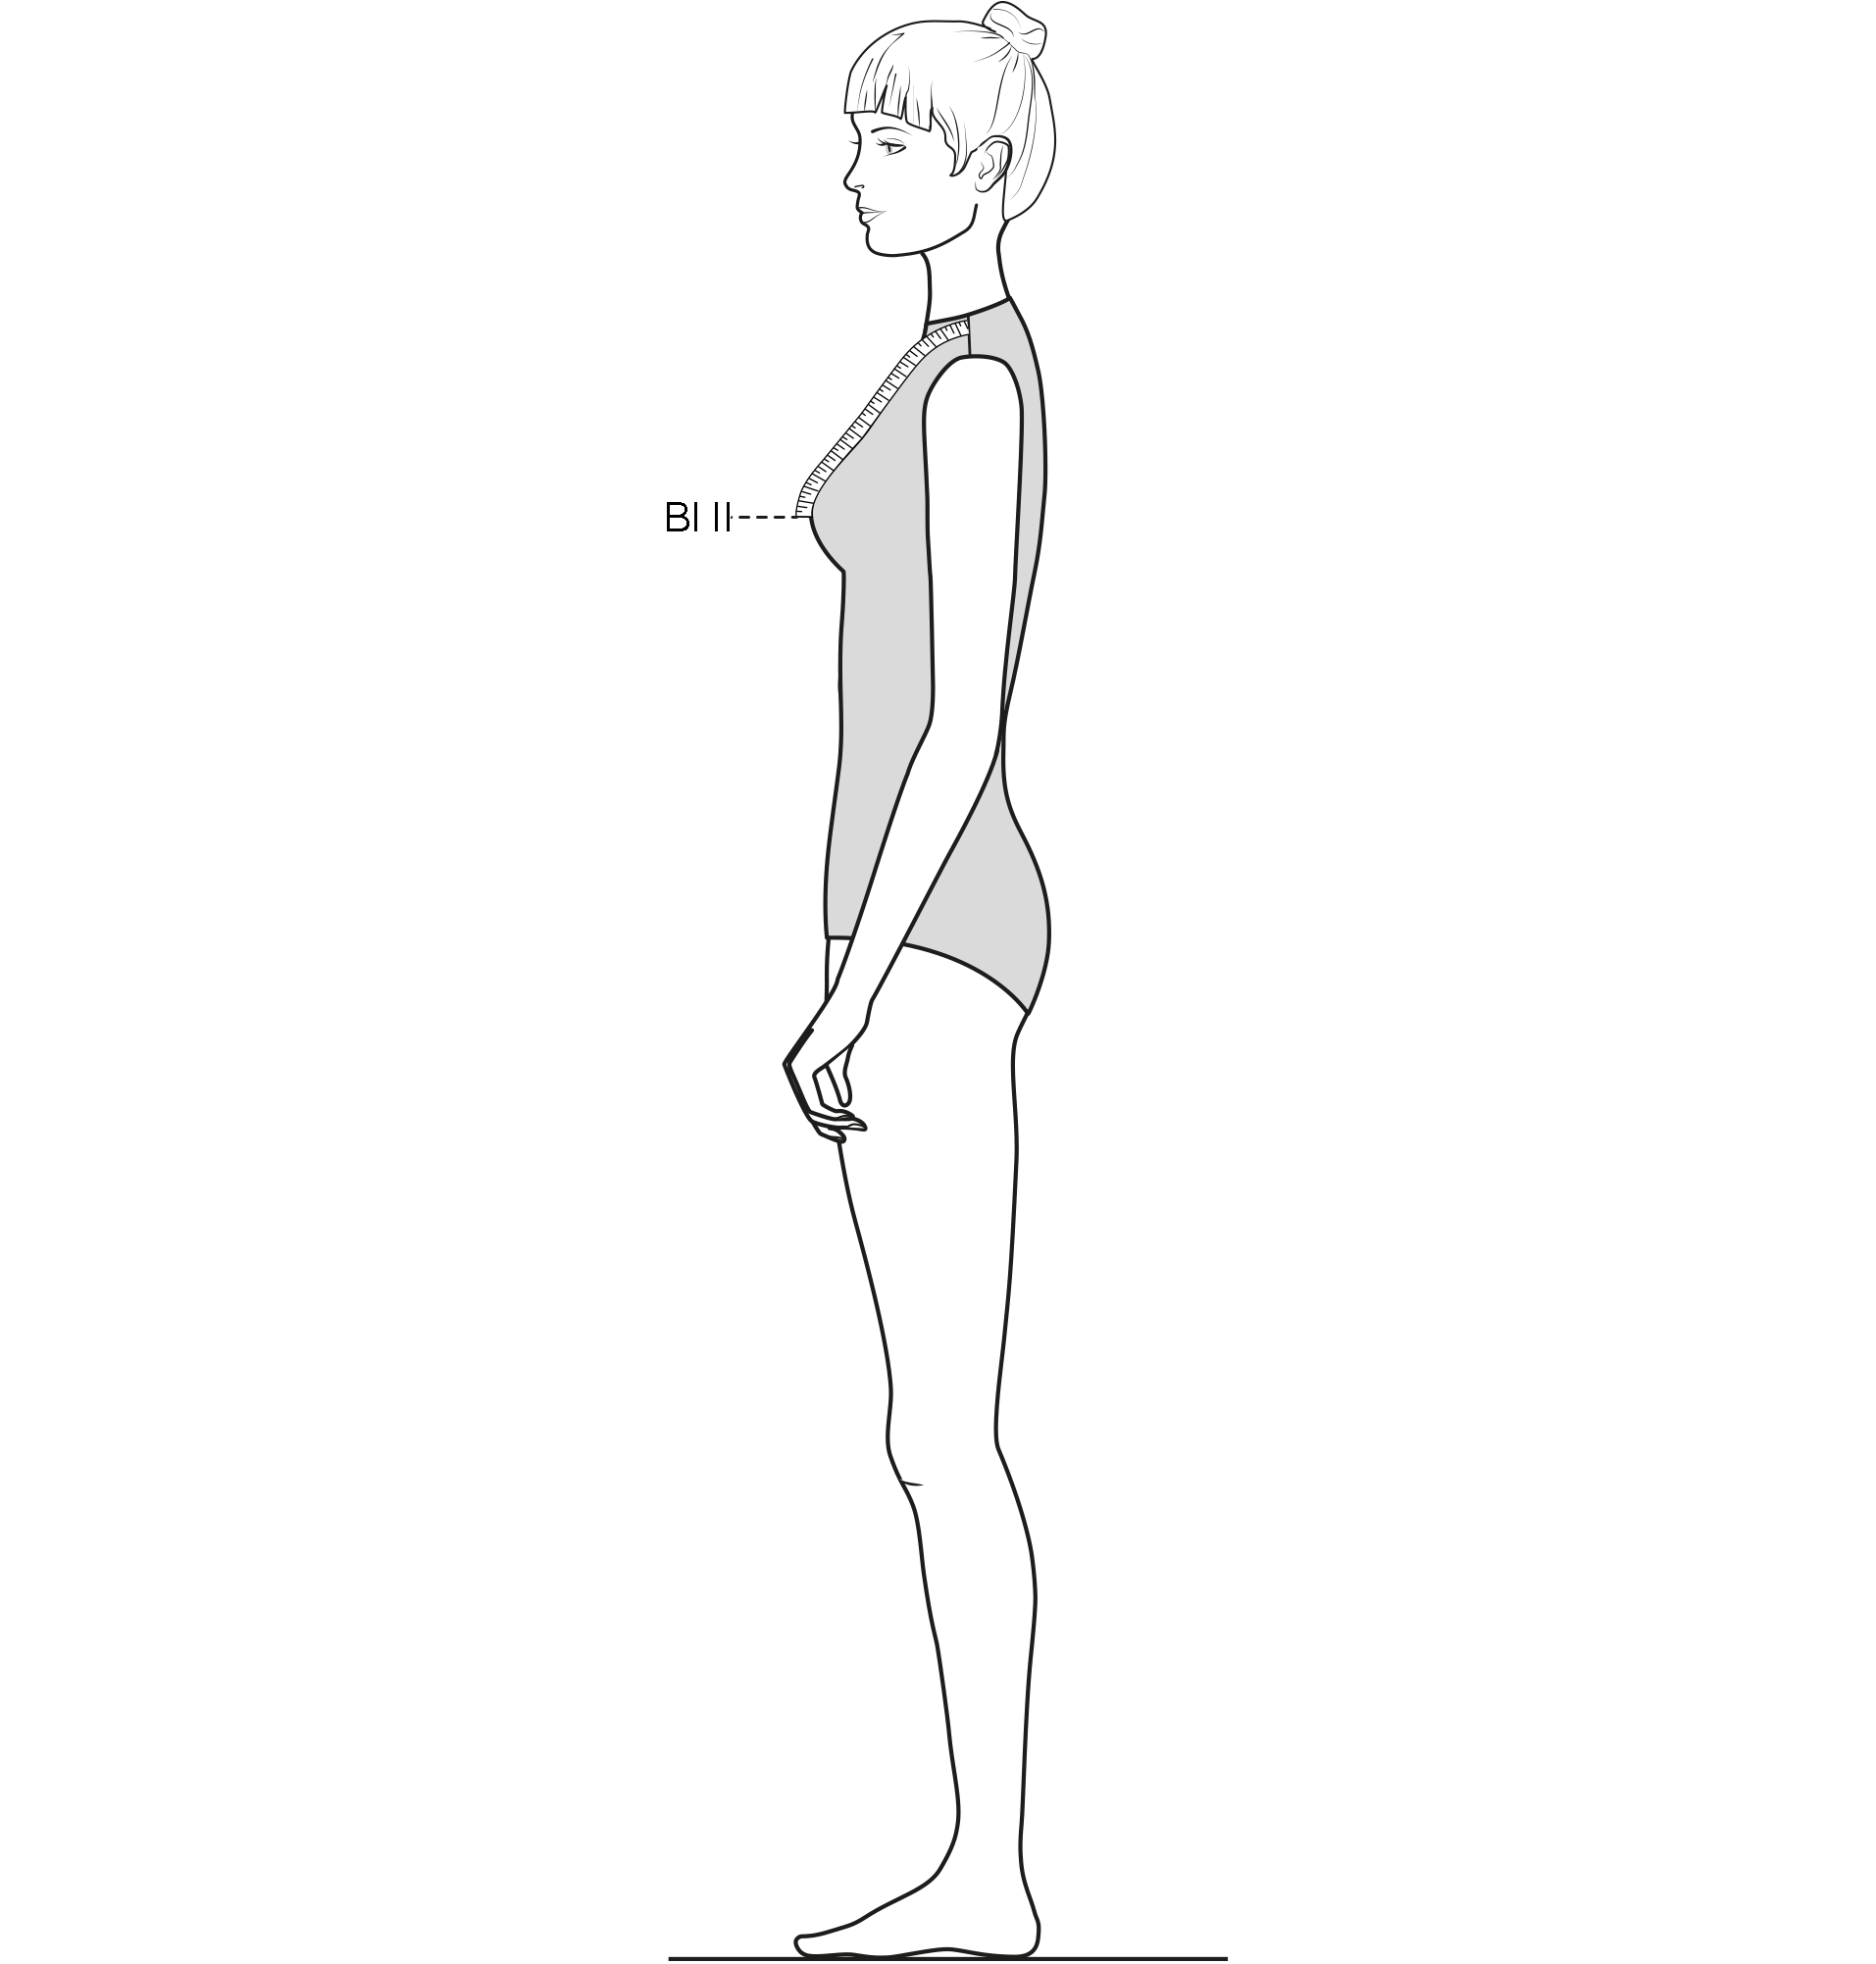 This figure shows the measurement of the Bust length